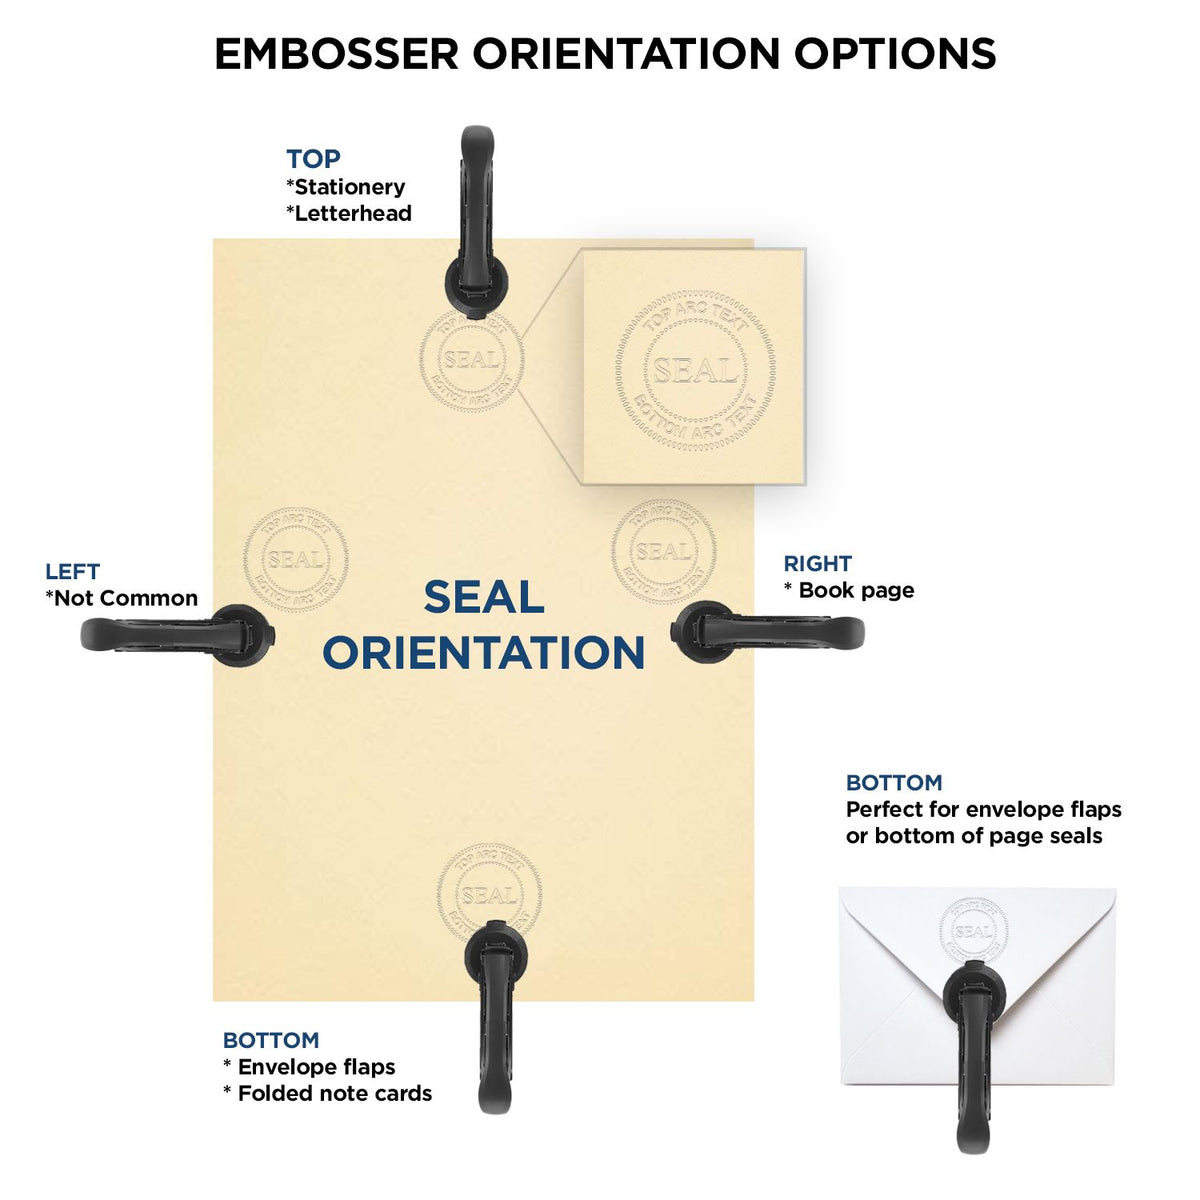 An infographic for the Heavy Duty Cast Iron Nevada Architect Embosser showing embosser orientation, this is showing examples of a top, bottom, right and left insert.